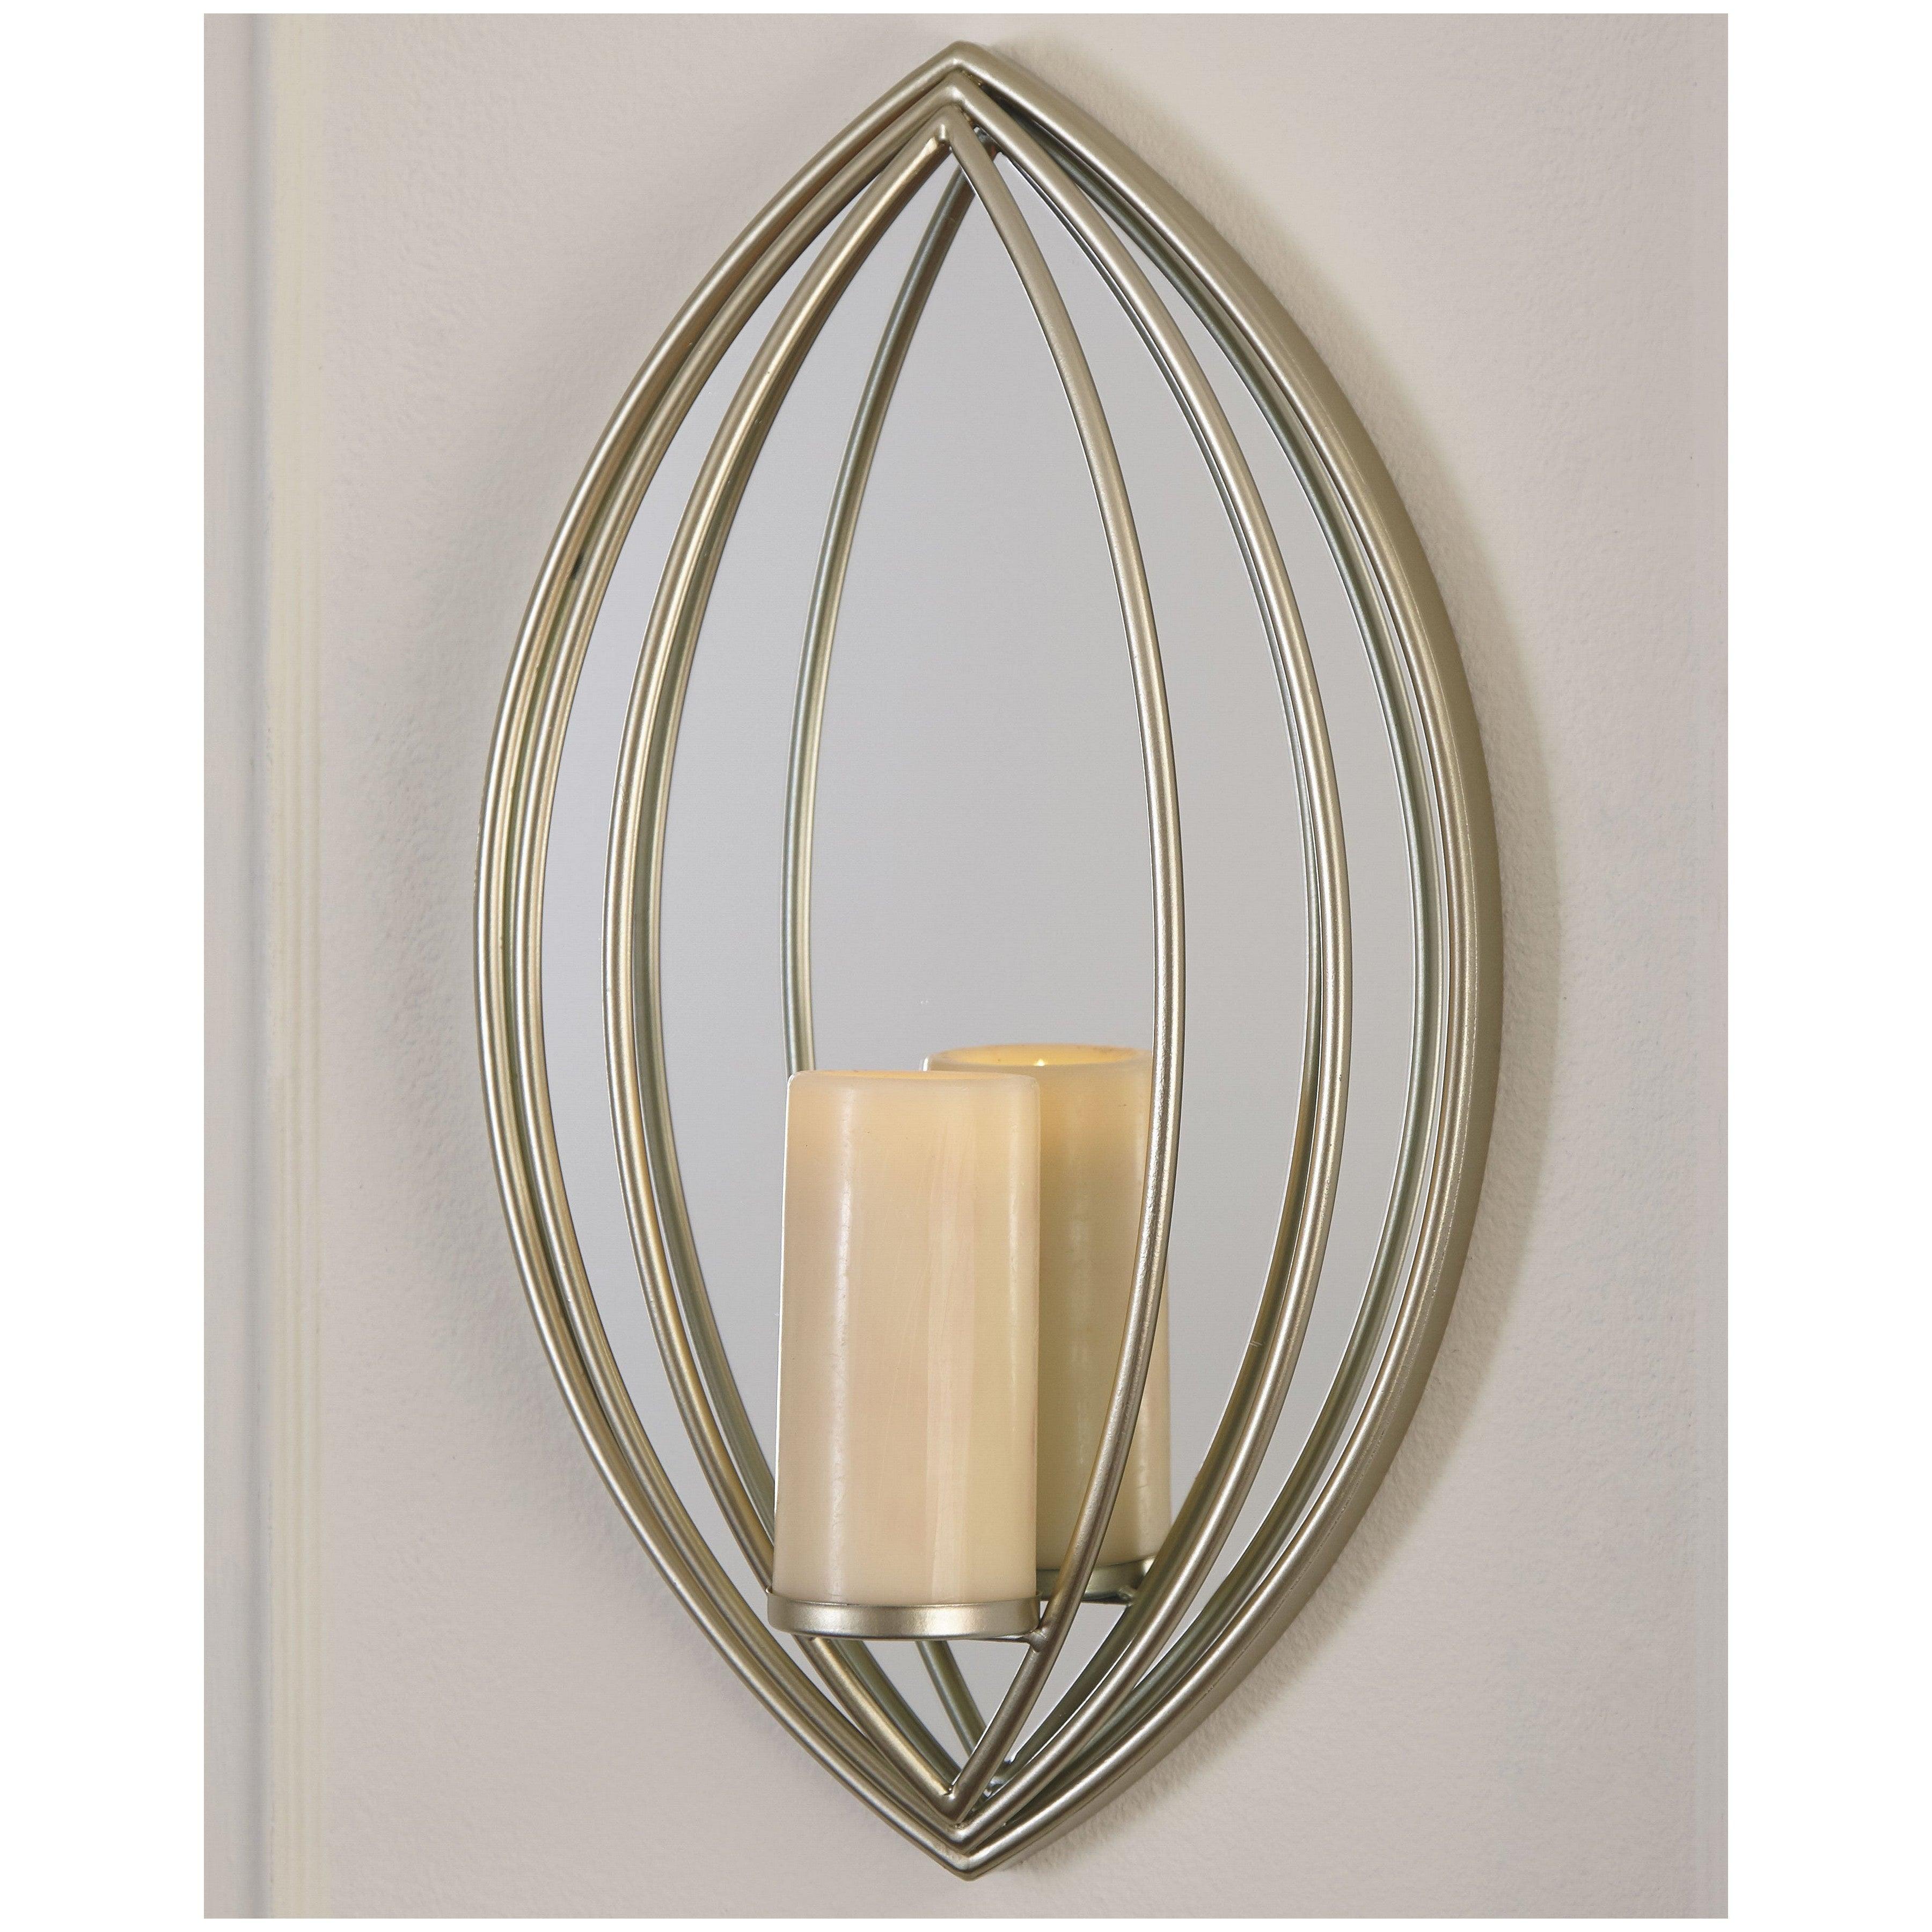 Donnica Wall Sconce Ash-A8010154